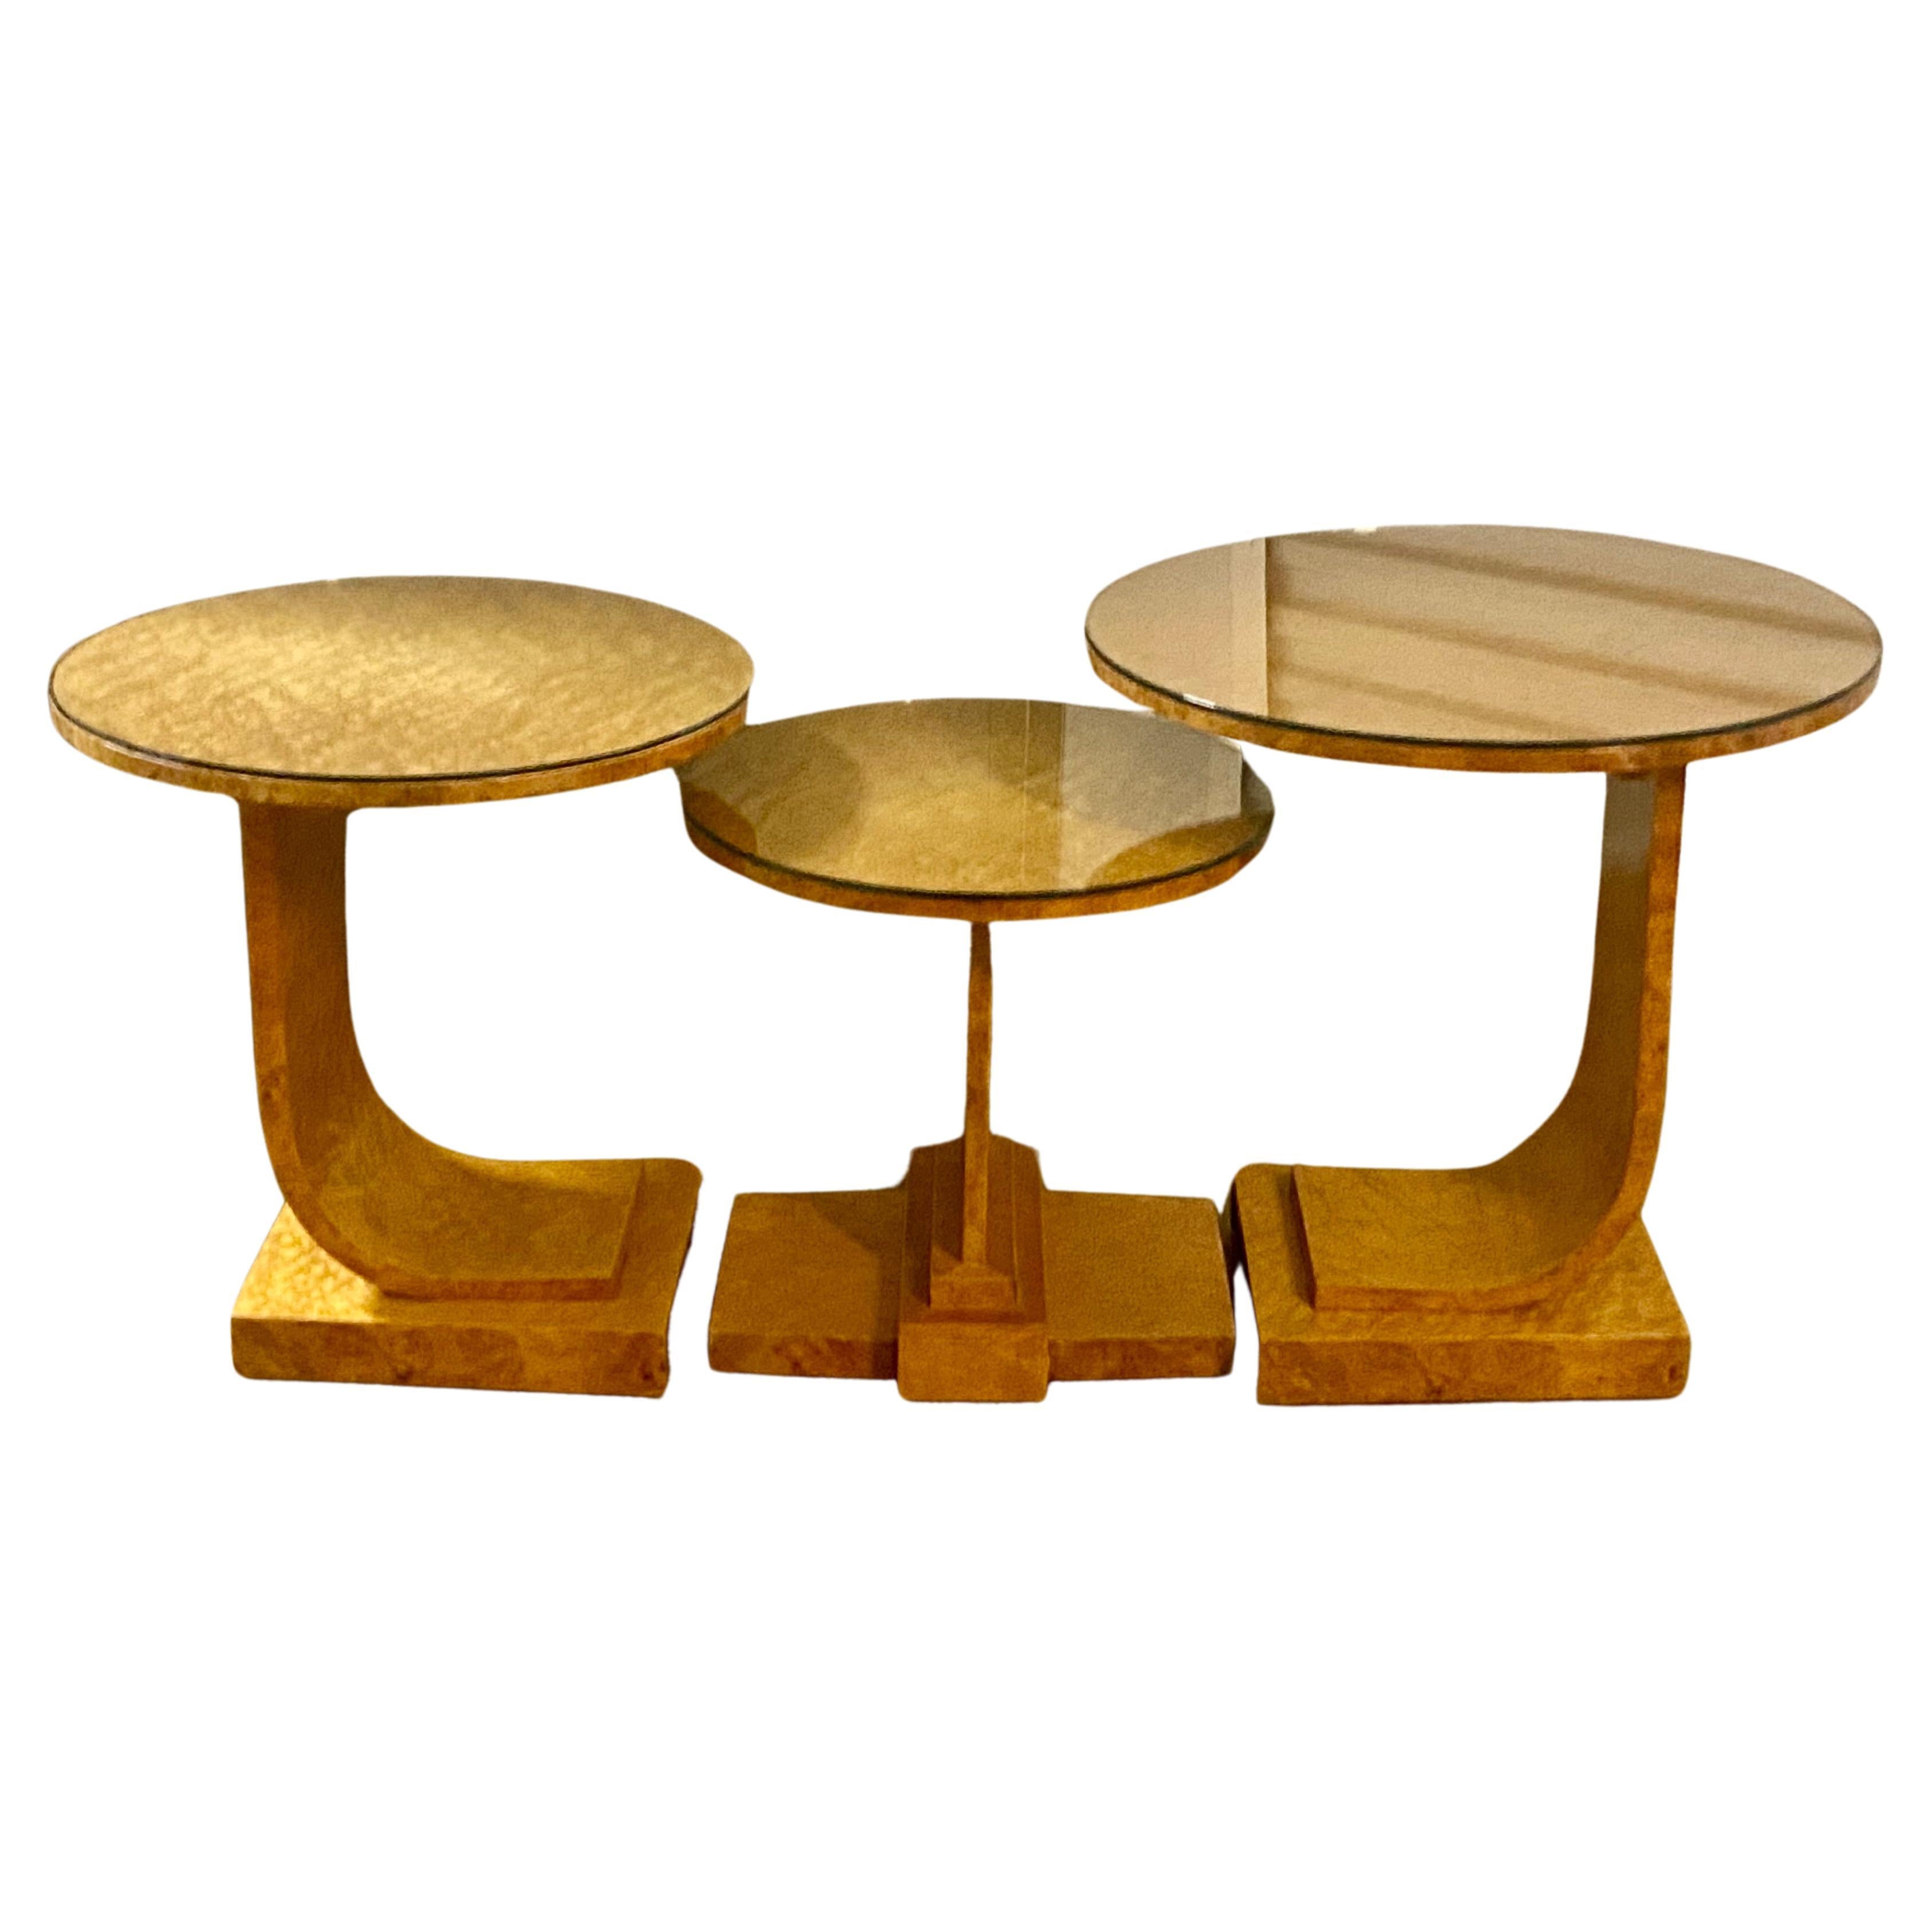 A Rare iconic J nest of tables finished in  birdseye maple veneer. 
Art Deco Blonde Burr Maple nest of 3 tables by H&L Epstein. This is widely considered as the rarest and most iconic Nesting Tables the brothers produced. This Classic art deco nest